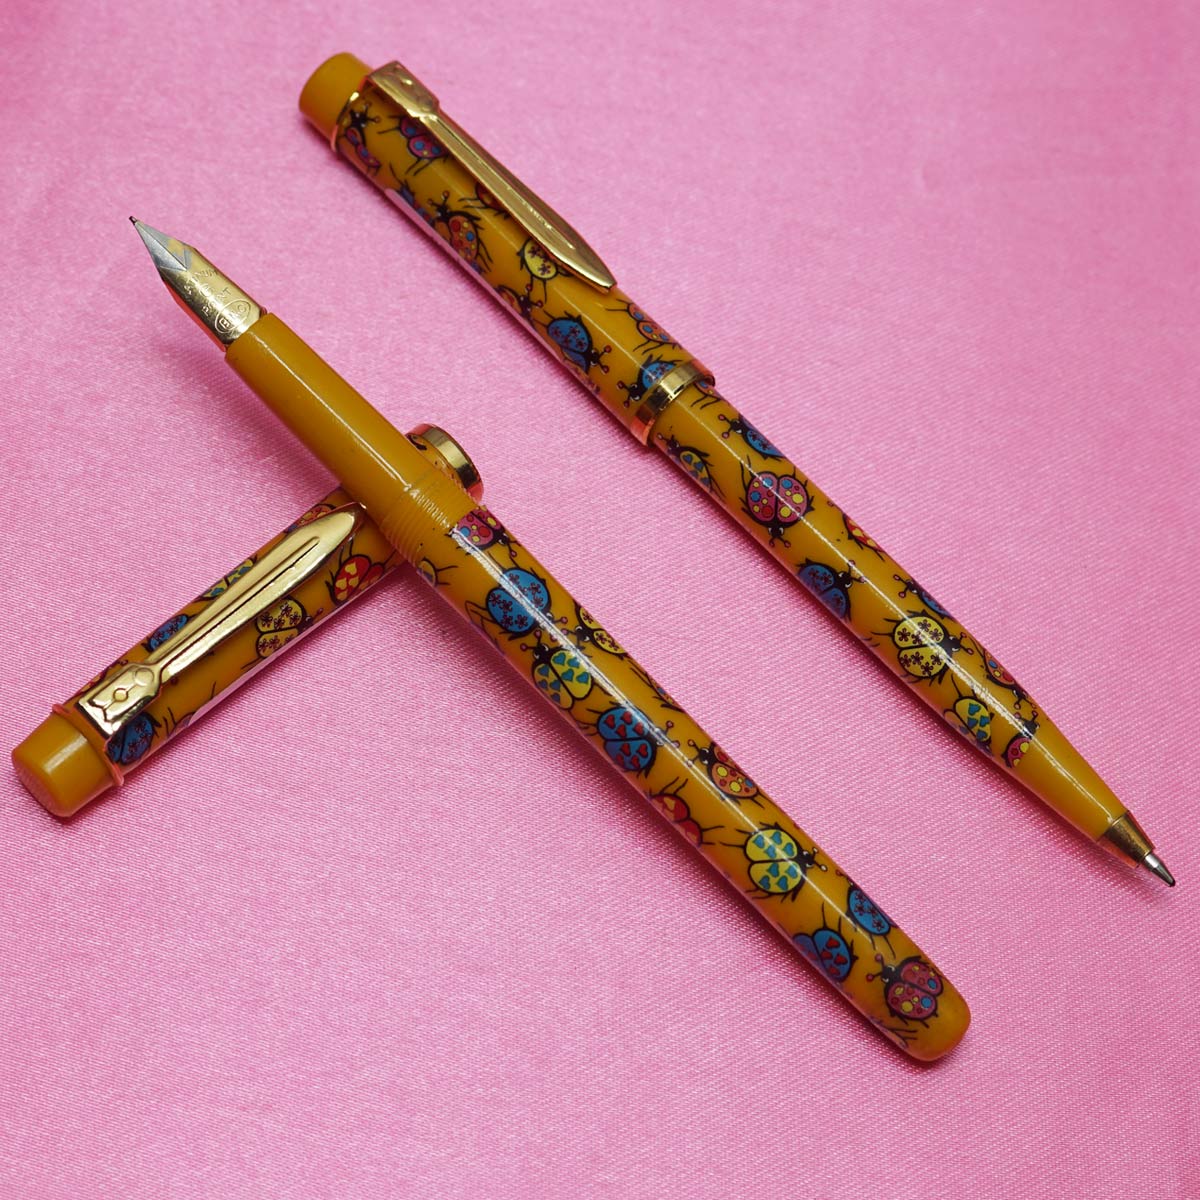 Alpha Yellow Color Body with color Beetles design on the body and cap Eye Dropper Model Fountain Pen and Ball Pen Set SKU 22220